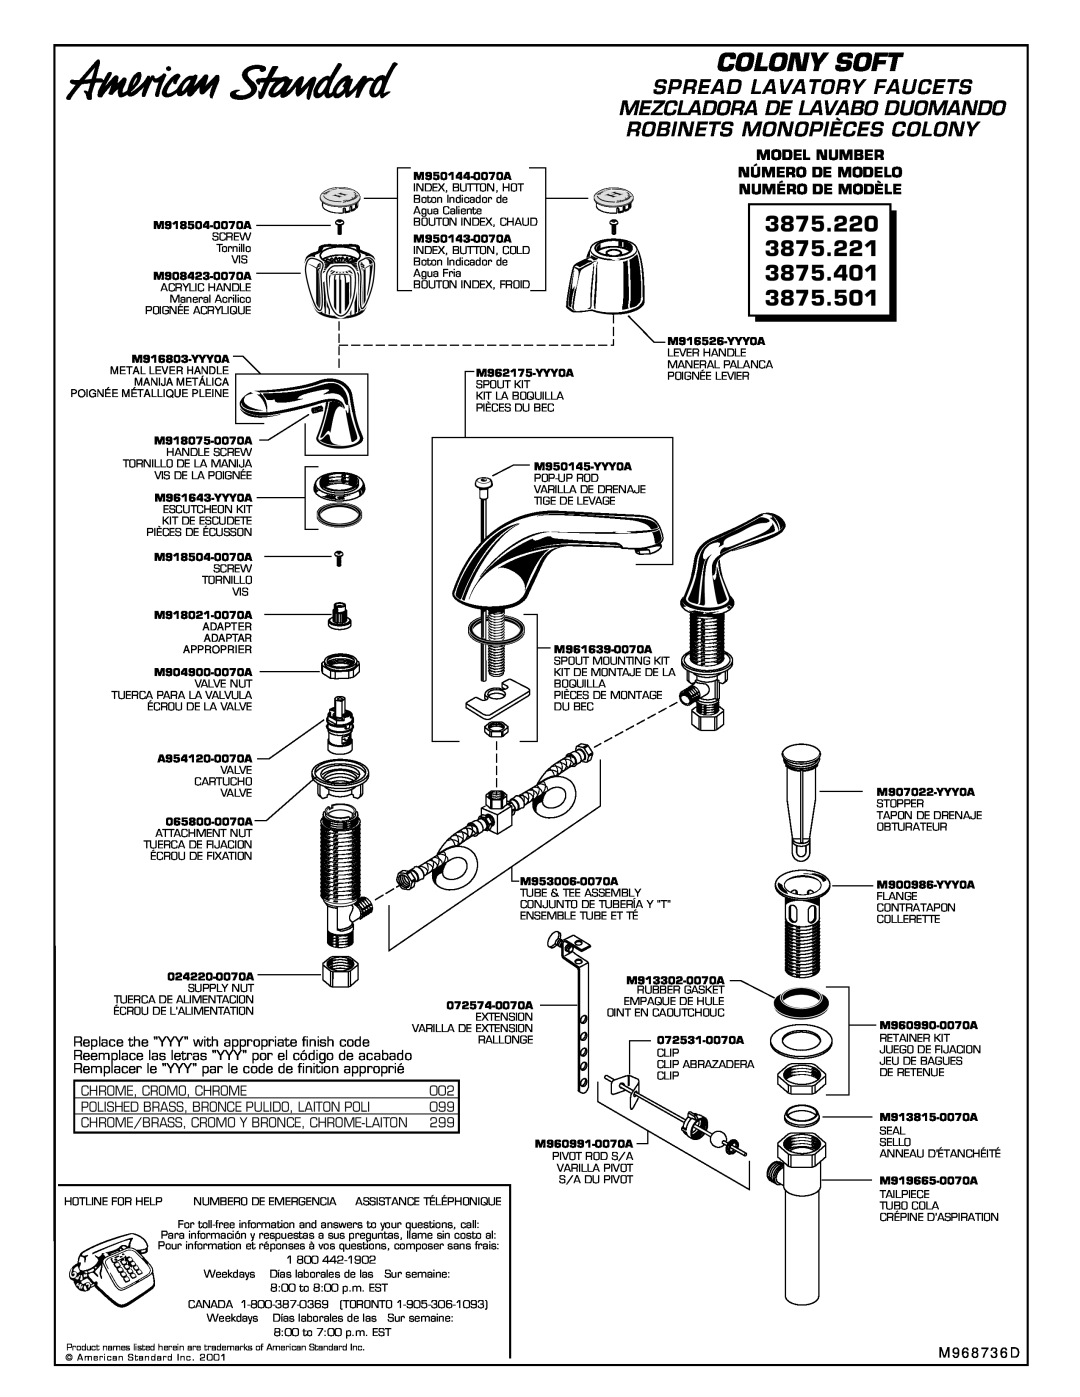 American Standard 3875.401 Colony Soft, 3875.220 3875.221, Spread Lavatory Faucets, M 9 6 8 7 3 6 D 